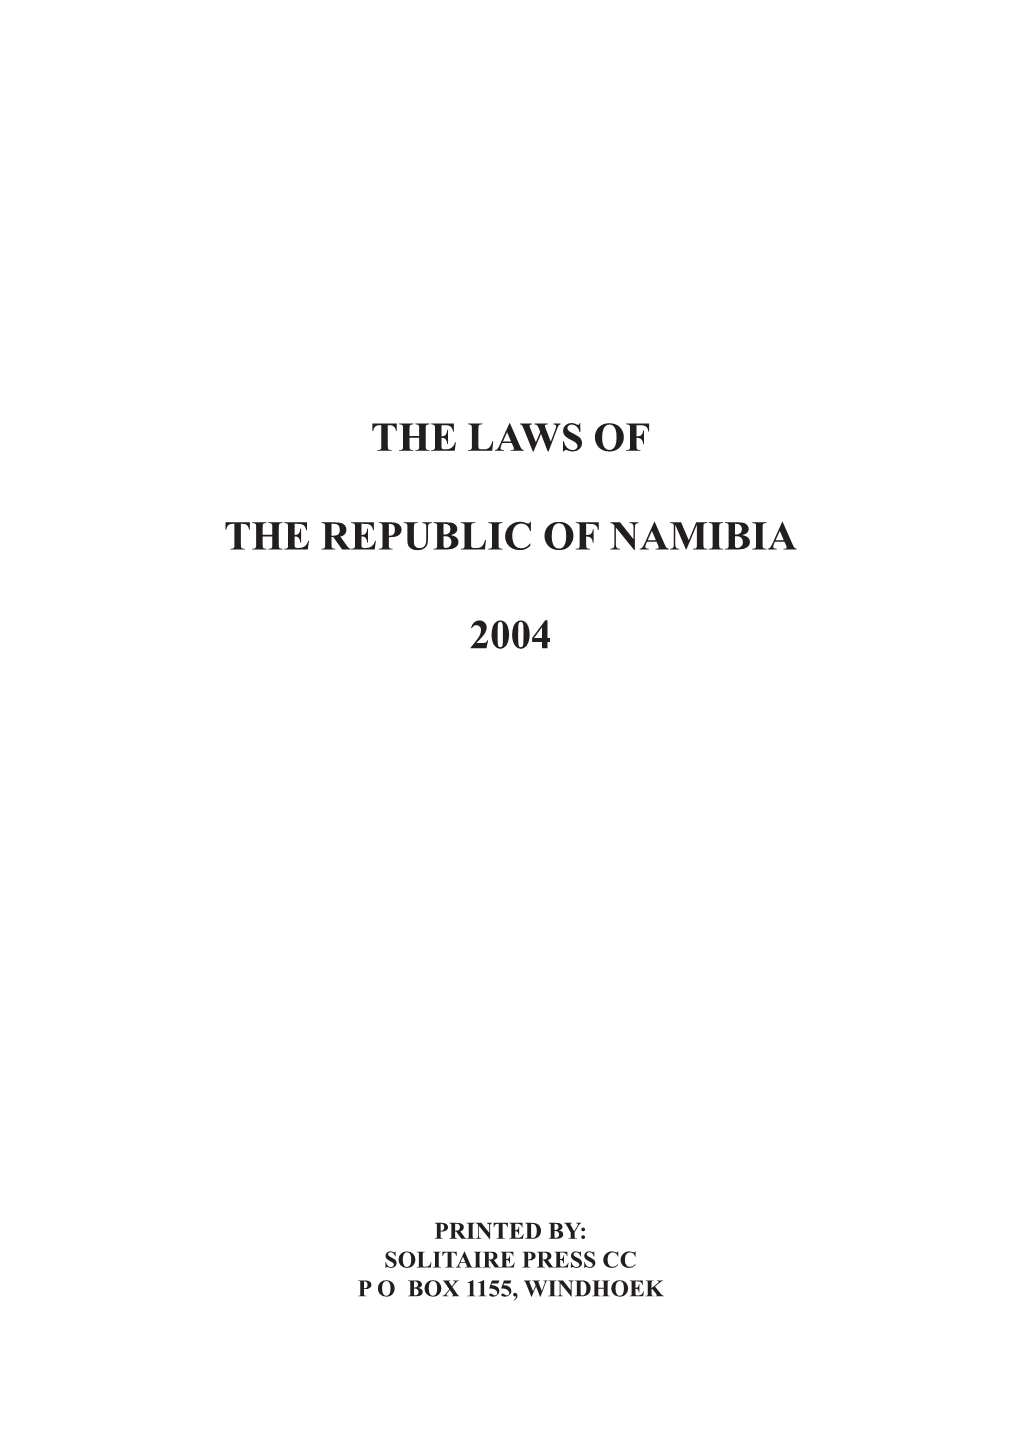 The Laws of the Republic of Namibia 2004